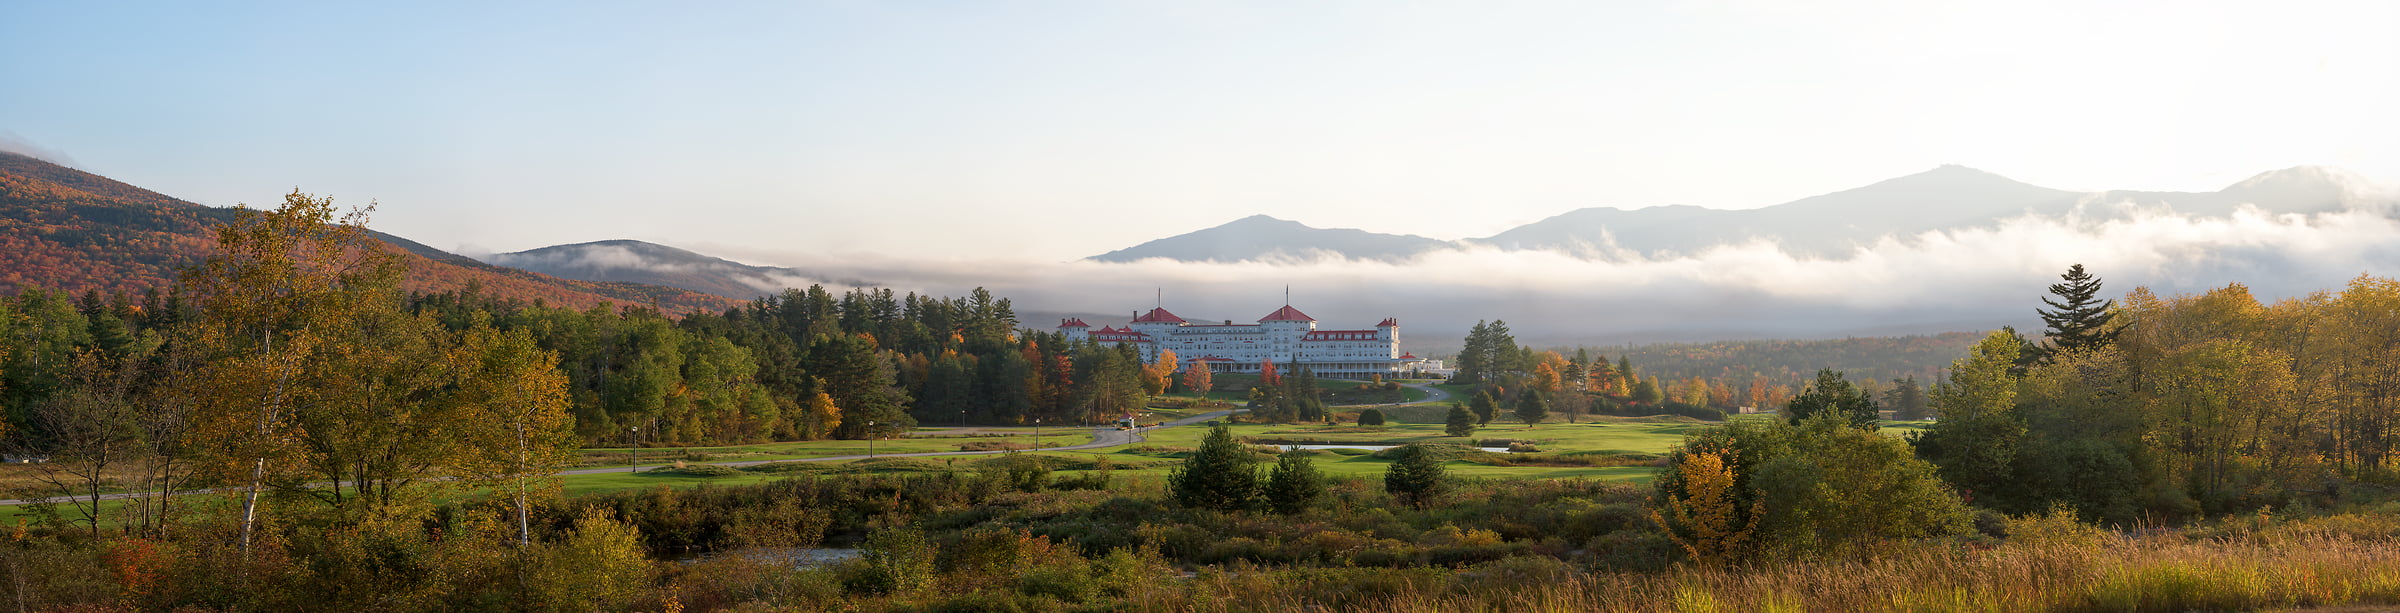 809 megapixels! A very high resolution, large-format VAST photo print of Mount Washington Hotel; landscape photograph created by Aaron Priest in Bretton Woods, Carroll, New Hampshire.